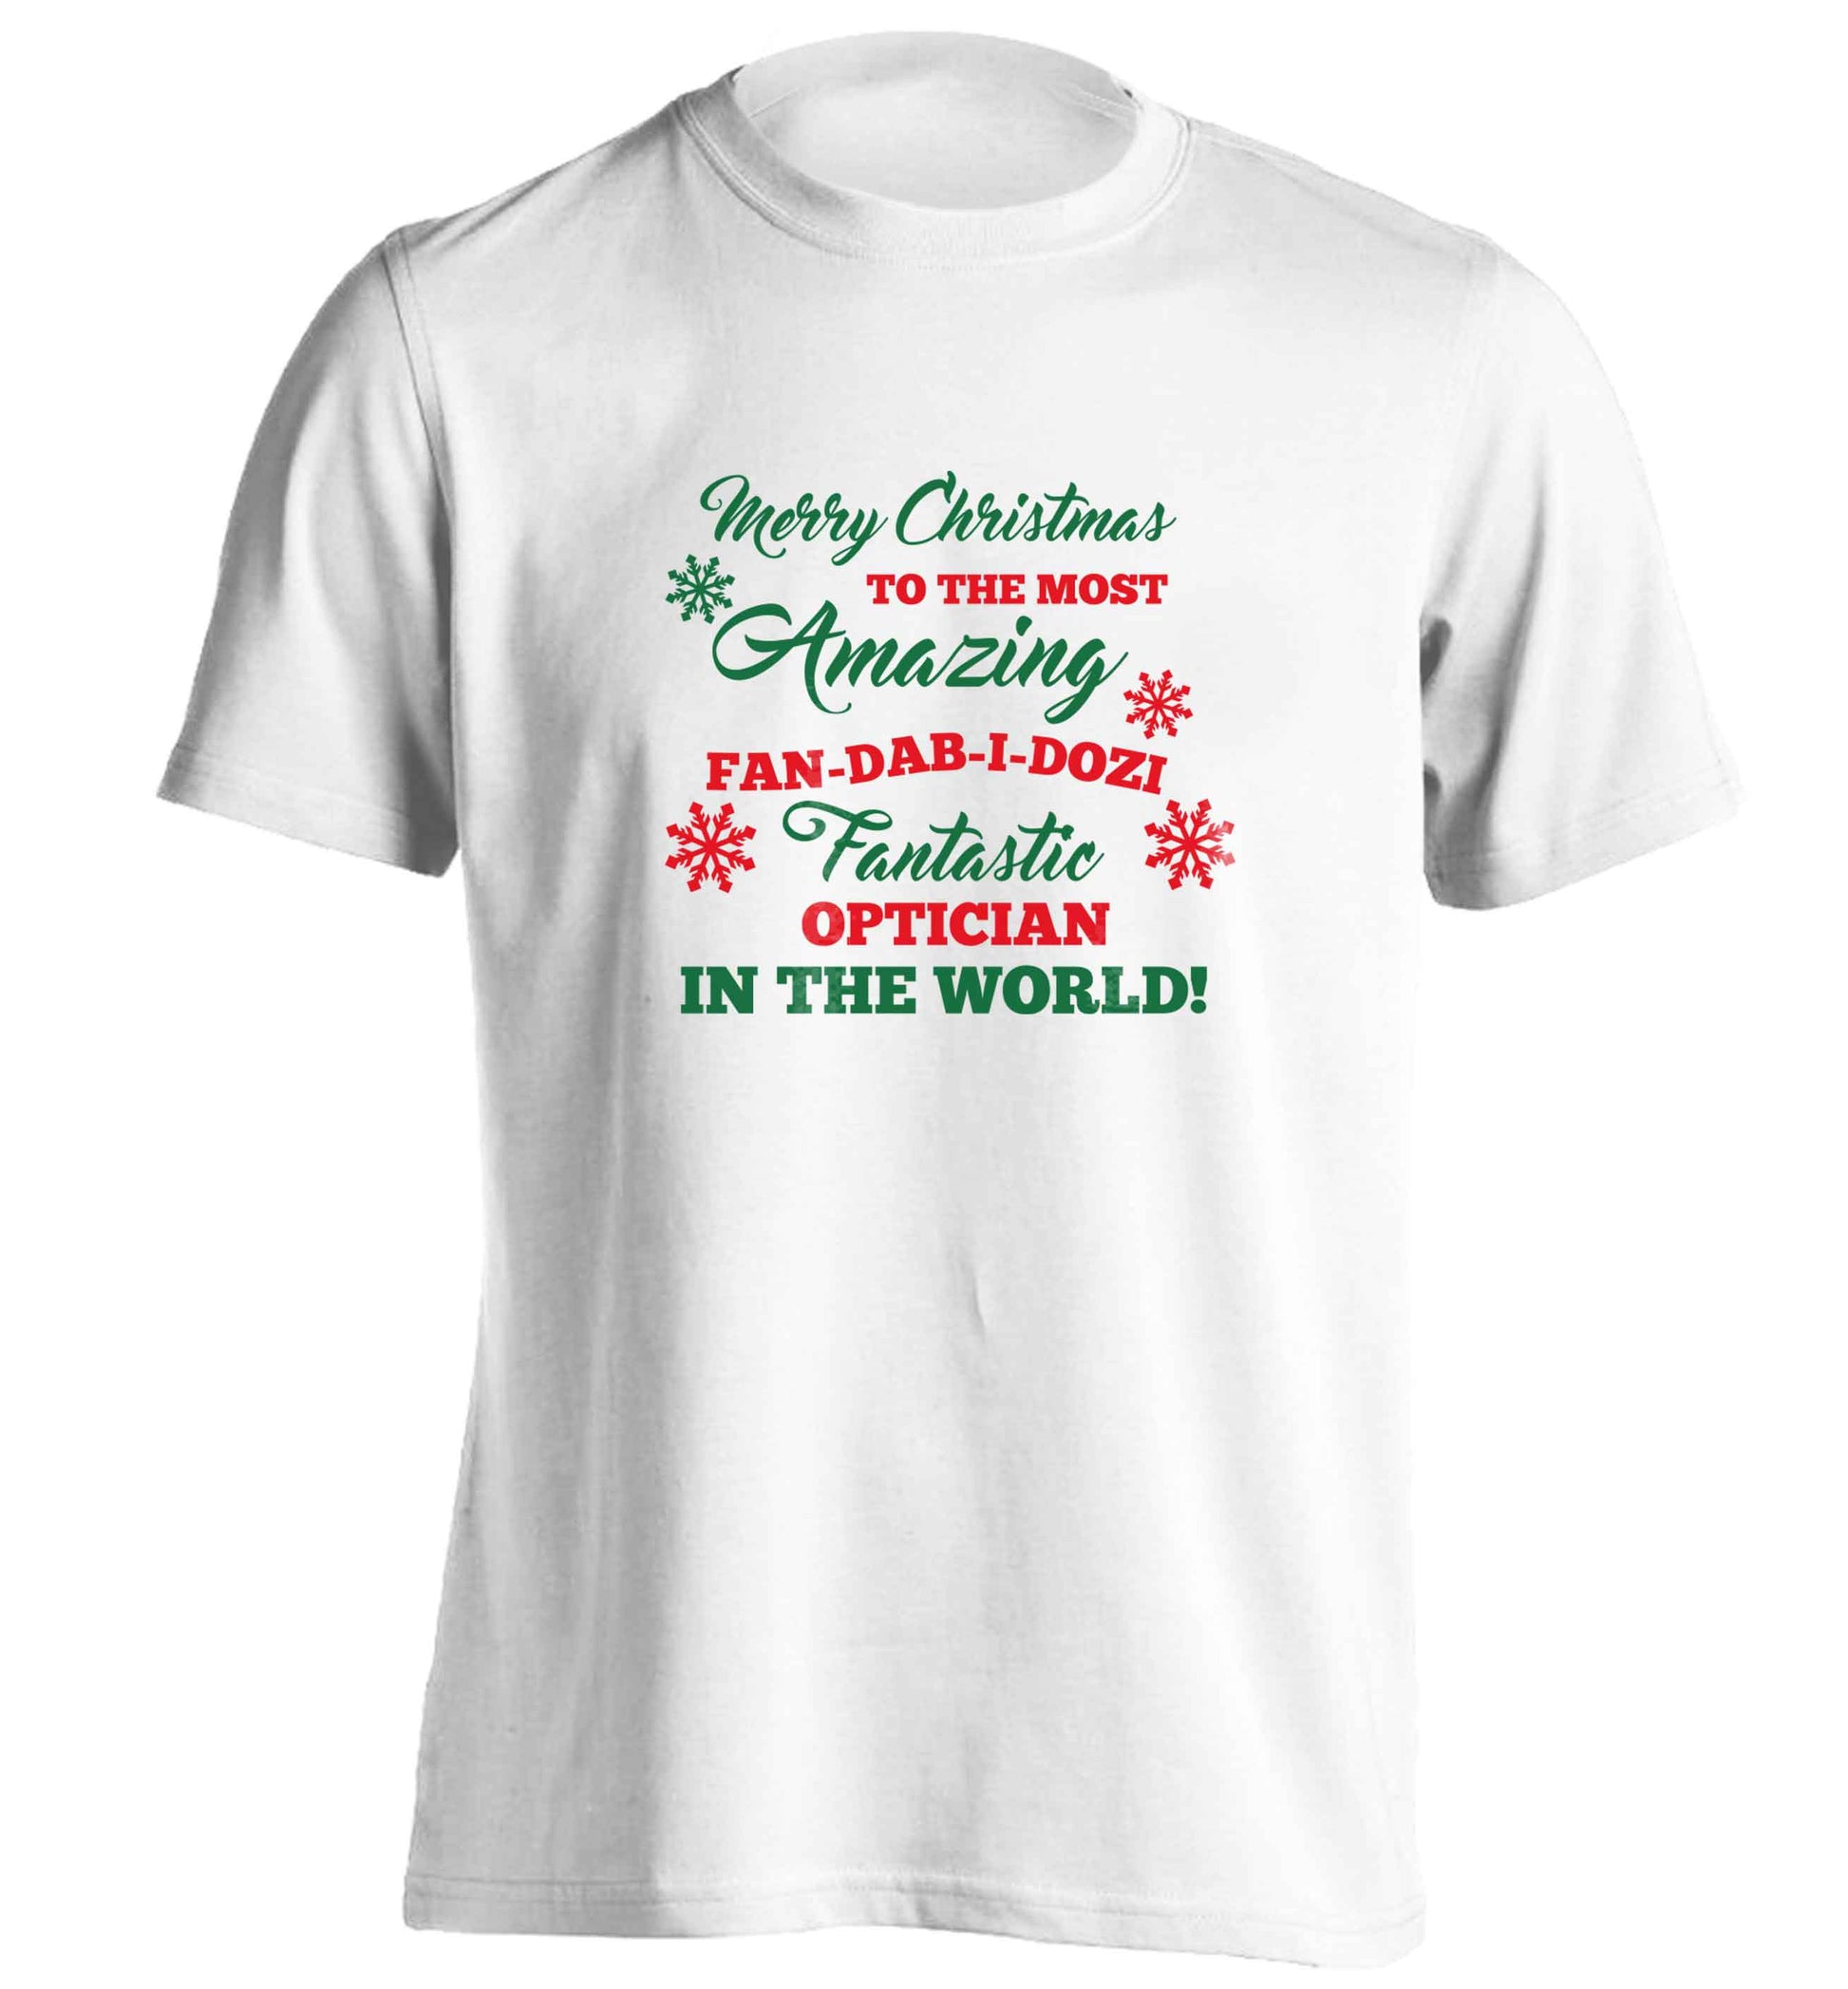 Merry Christmas to the most amazing optician in the world! adults unisex white Tshirt 2XL